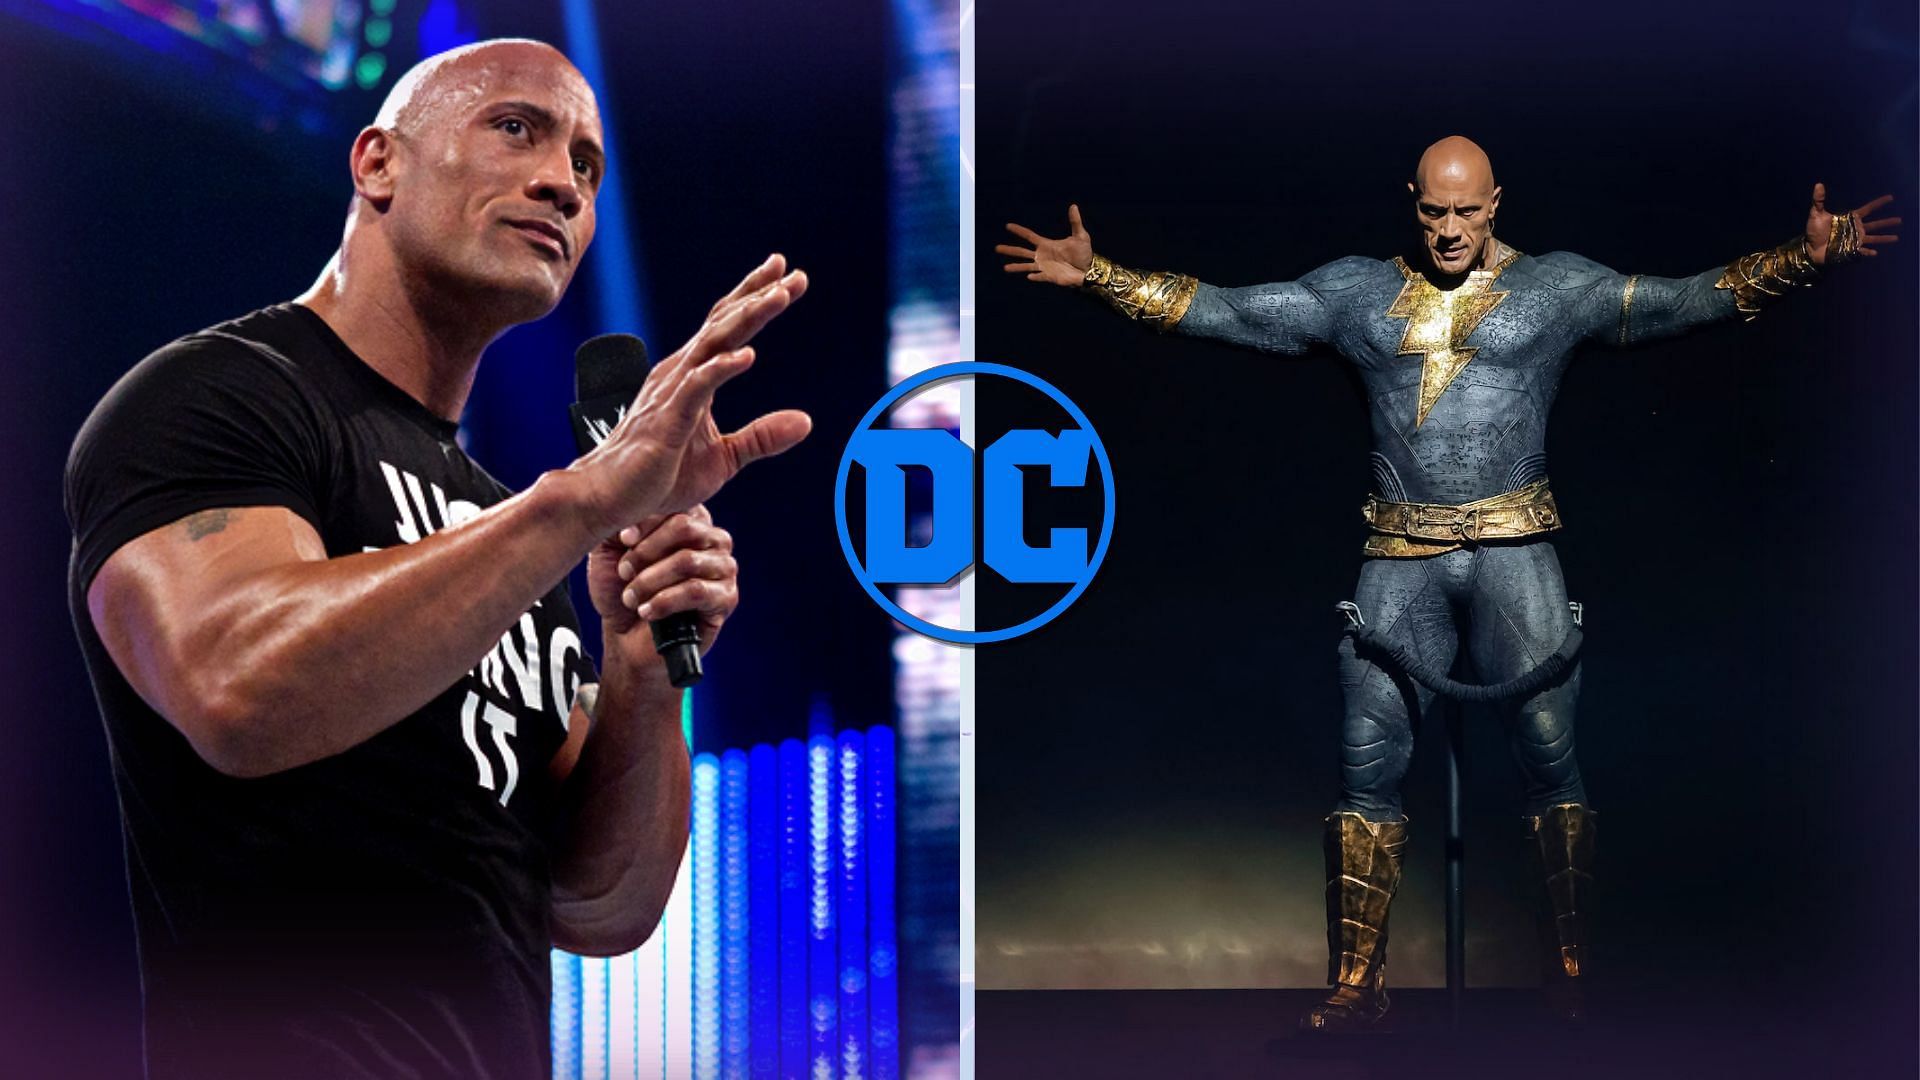 The Rock played DC comic